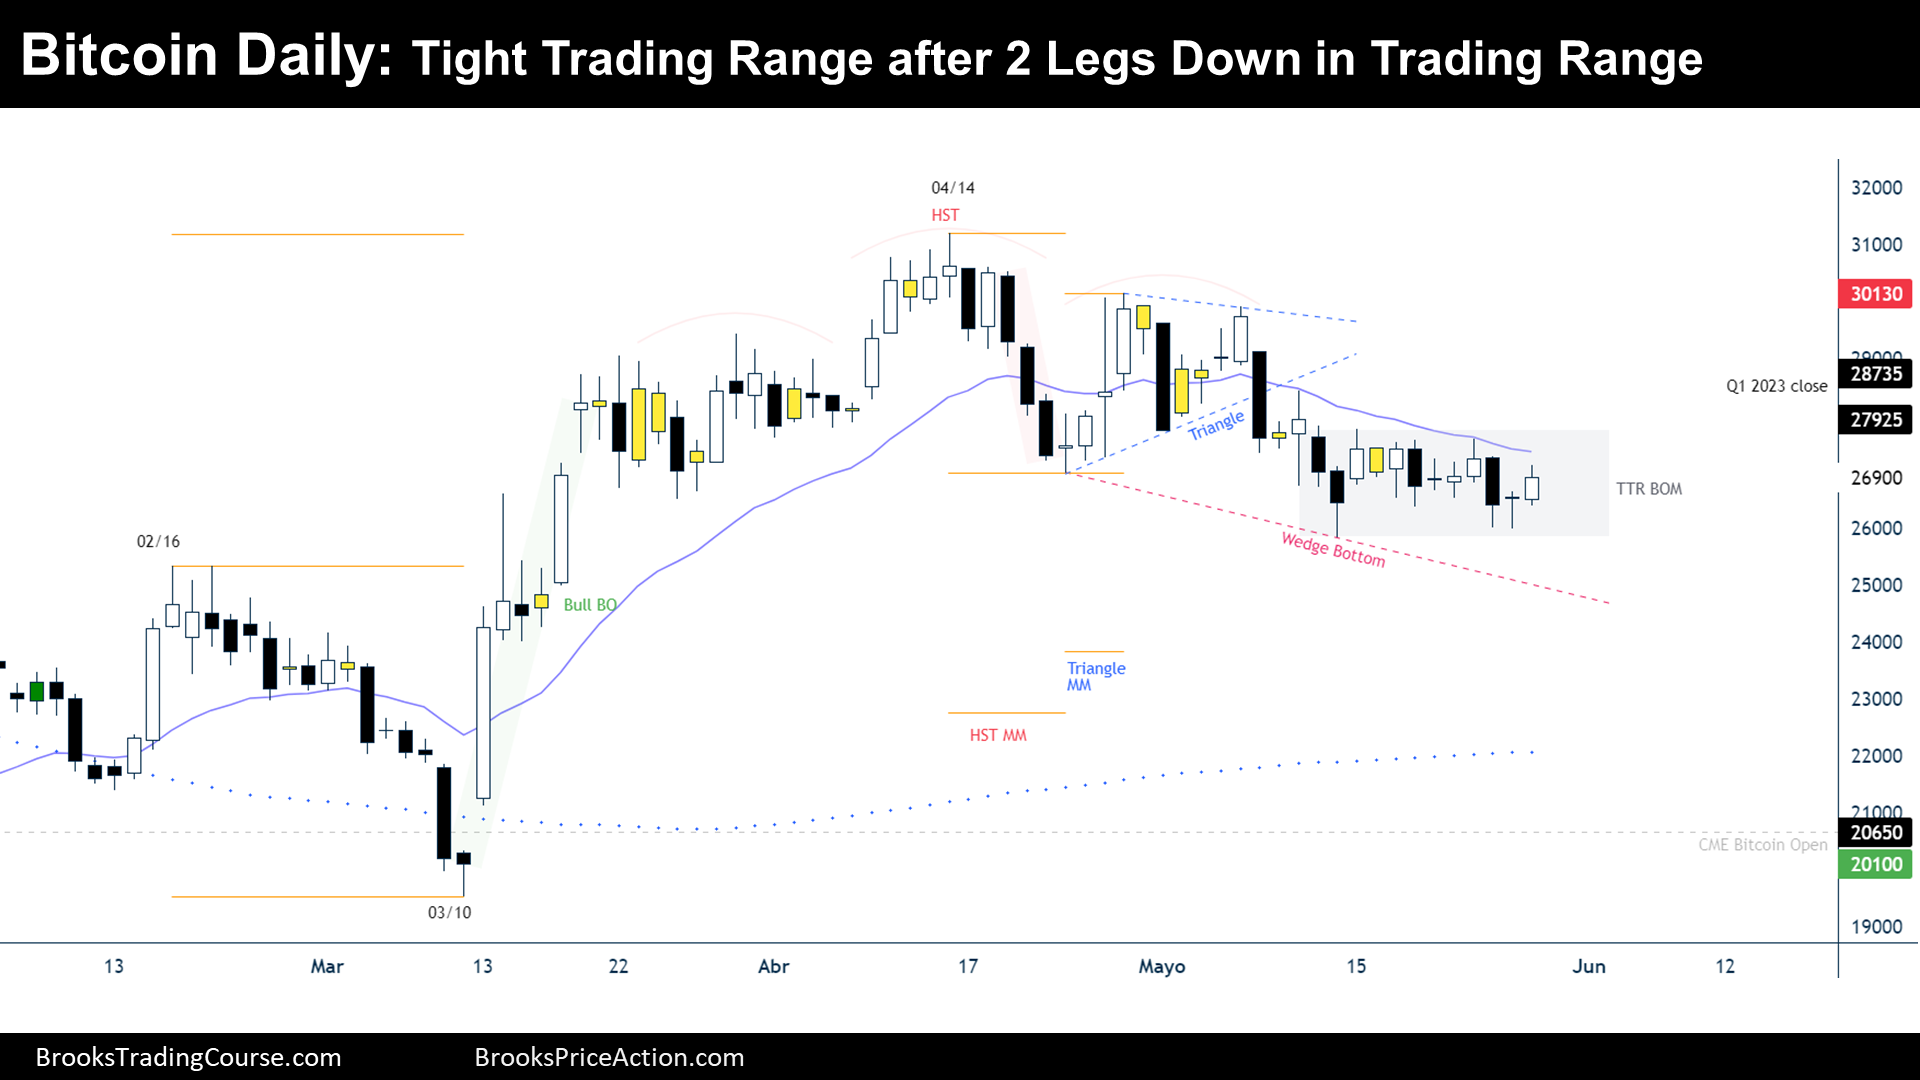 Bitcoin Daily Chart Tight Trading Range after 2 Legs Down in Trading Range